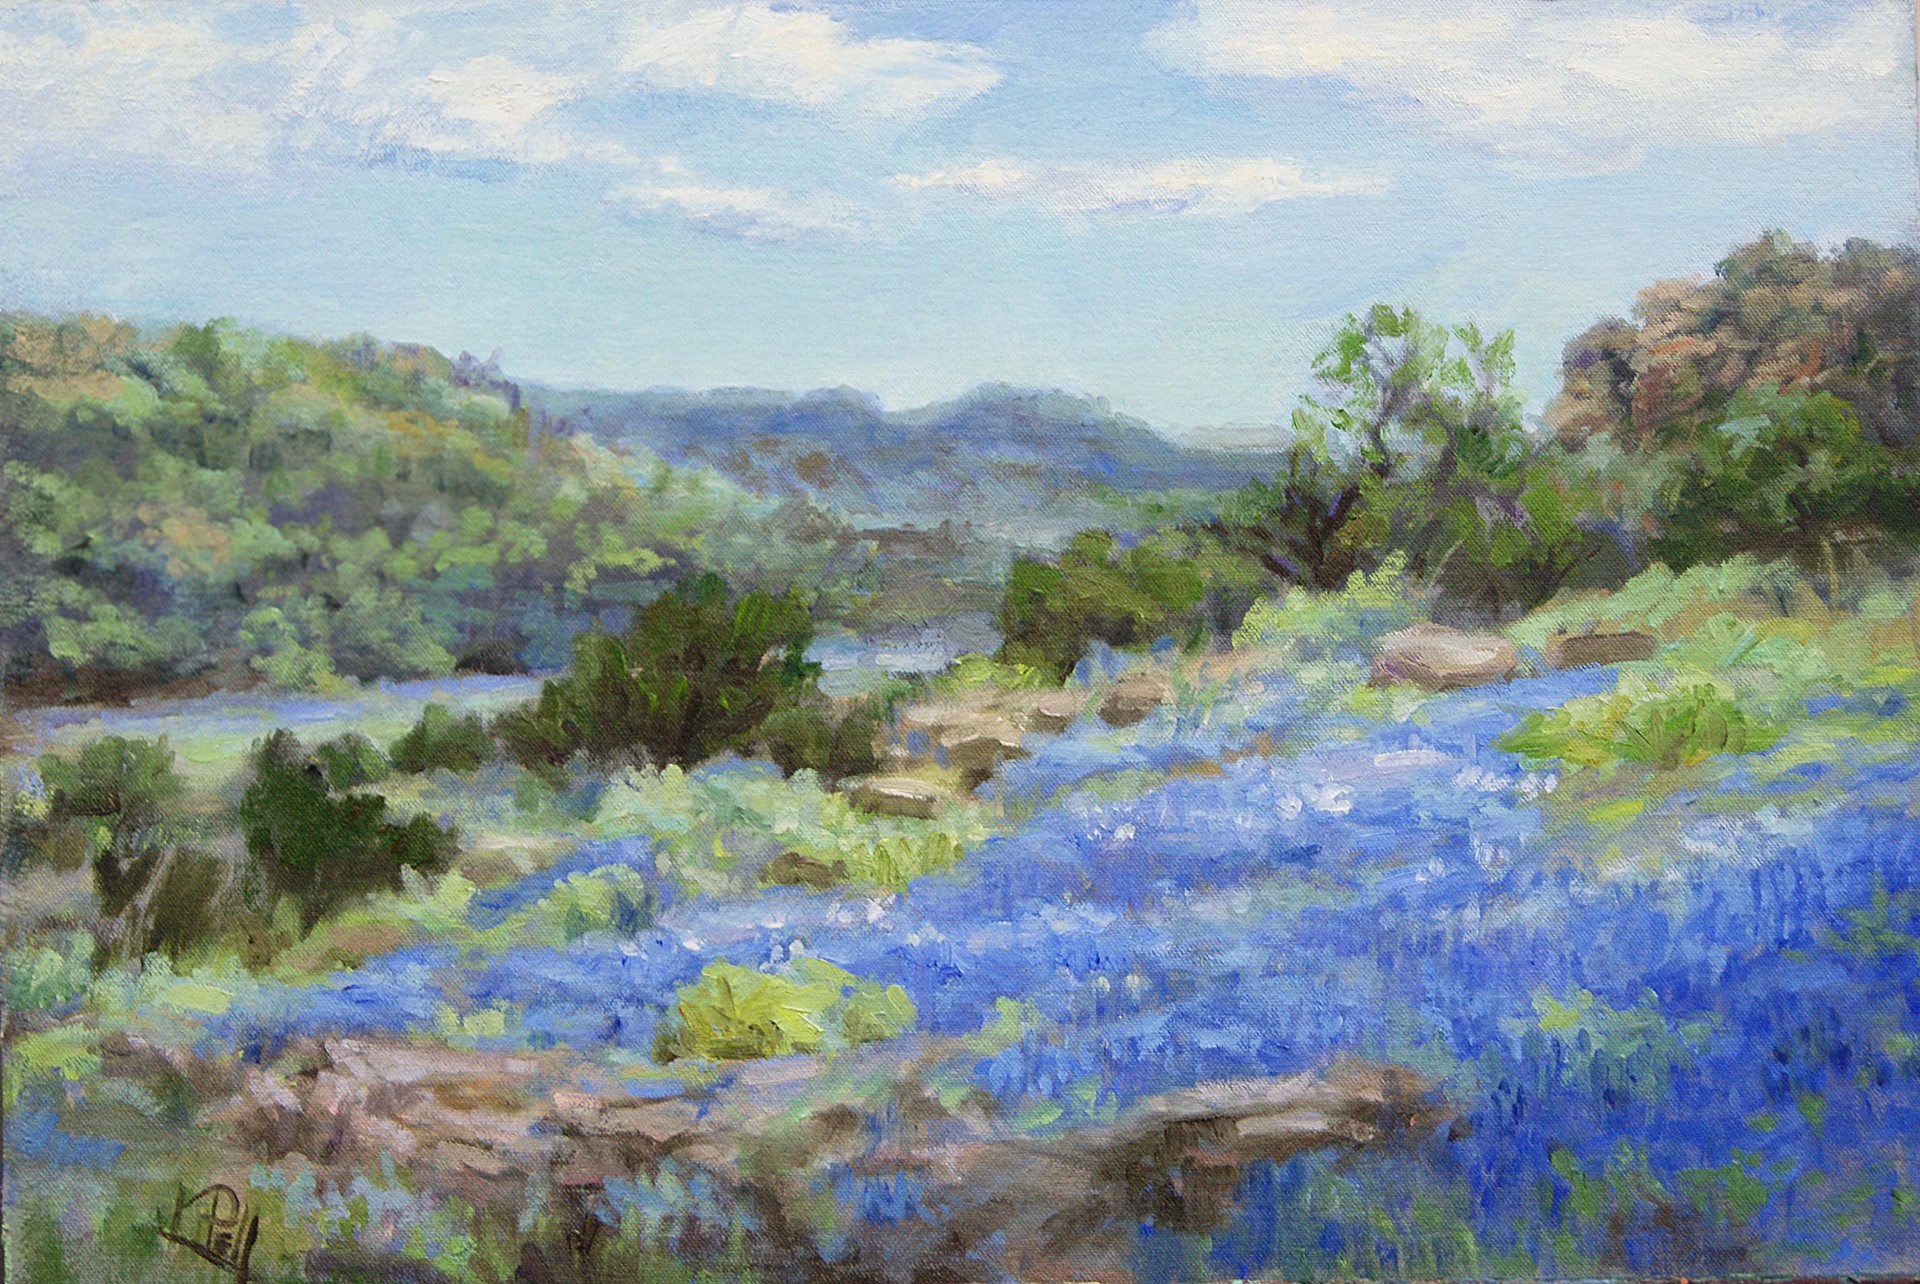 Texas Hill Country Bluebonnets by Lilli Pell